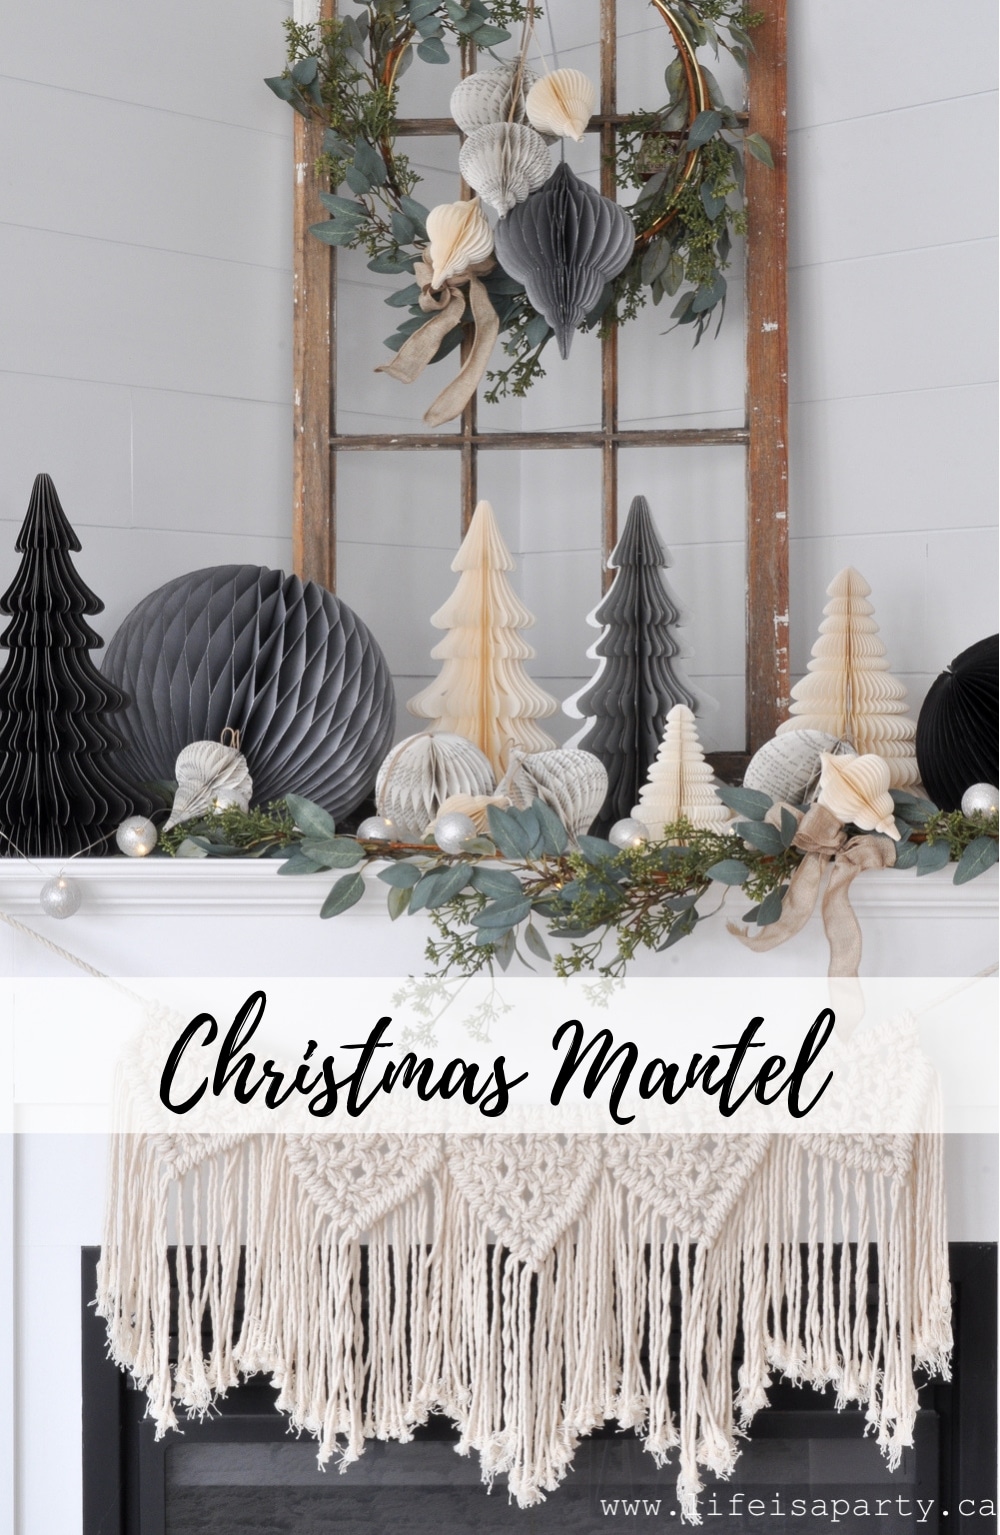 Christmas Mantel: beautiful paper honeycomb ornaments, balls, and Christmas tree decorations, combined with eucalyptus garland and twinkle lights.